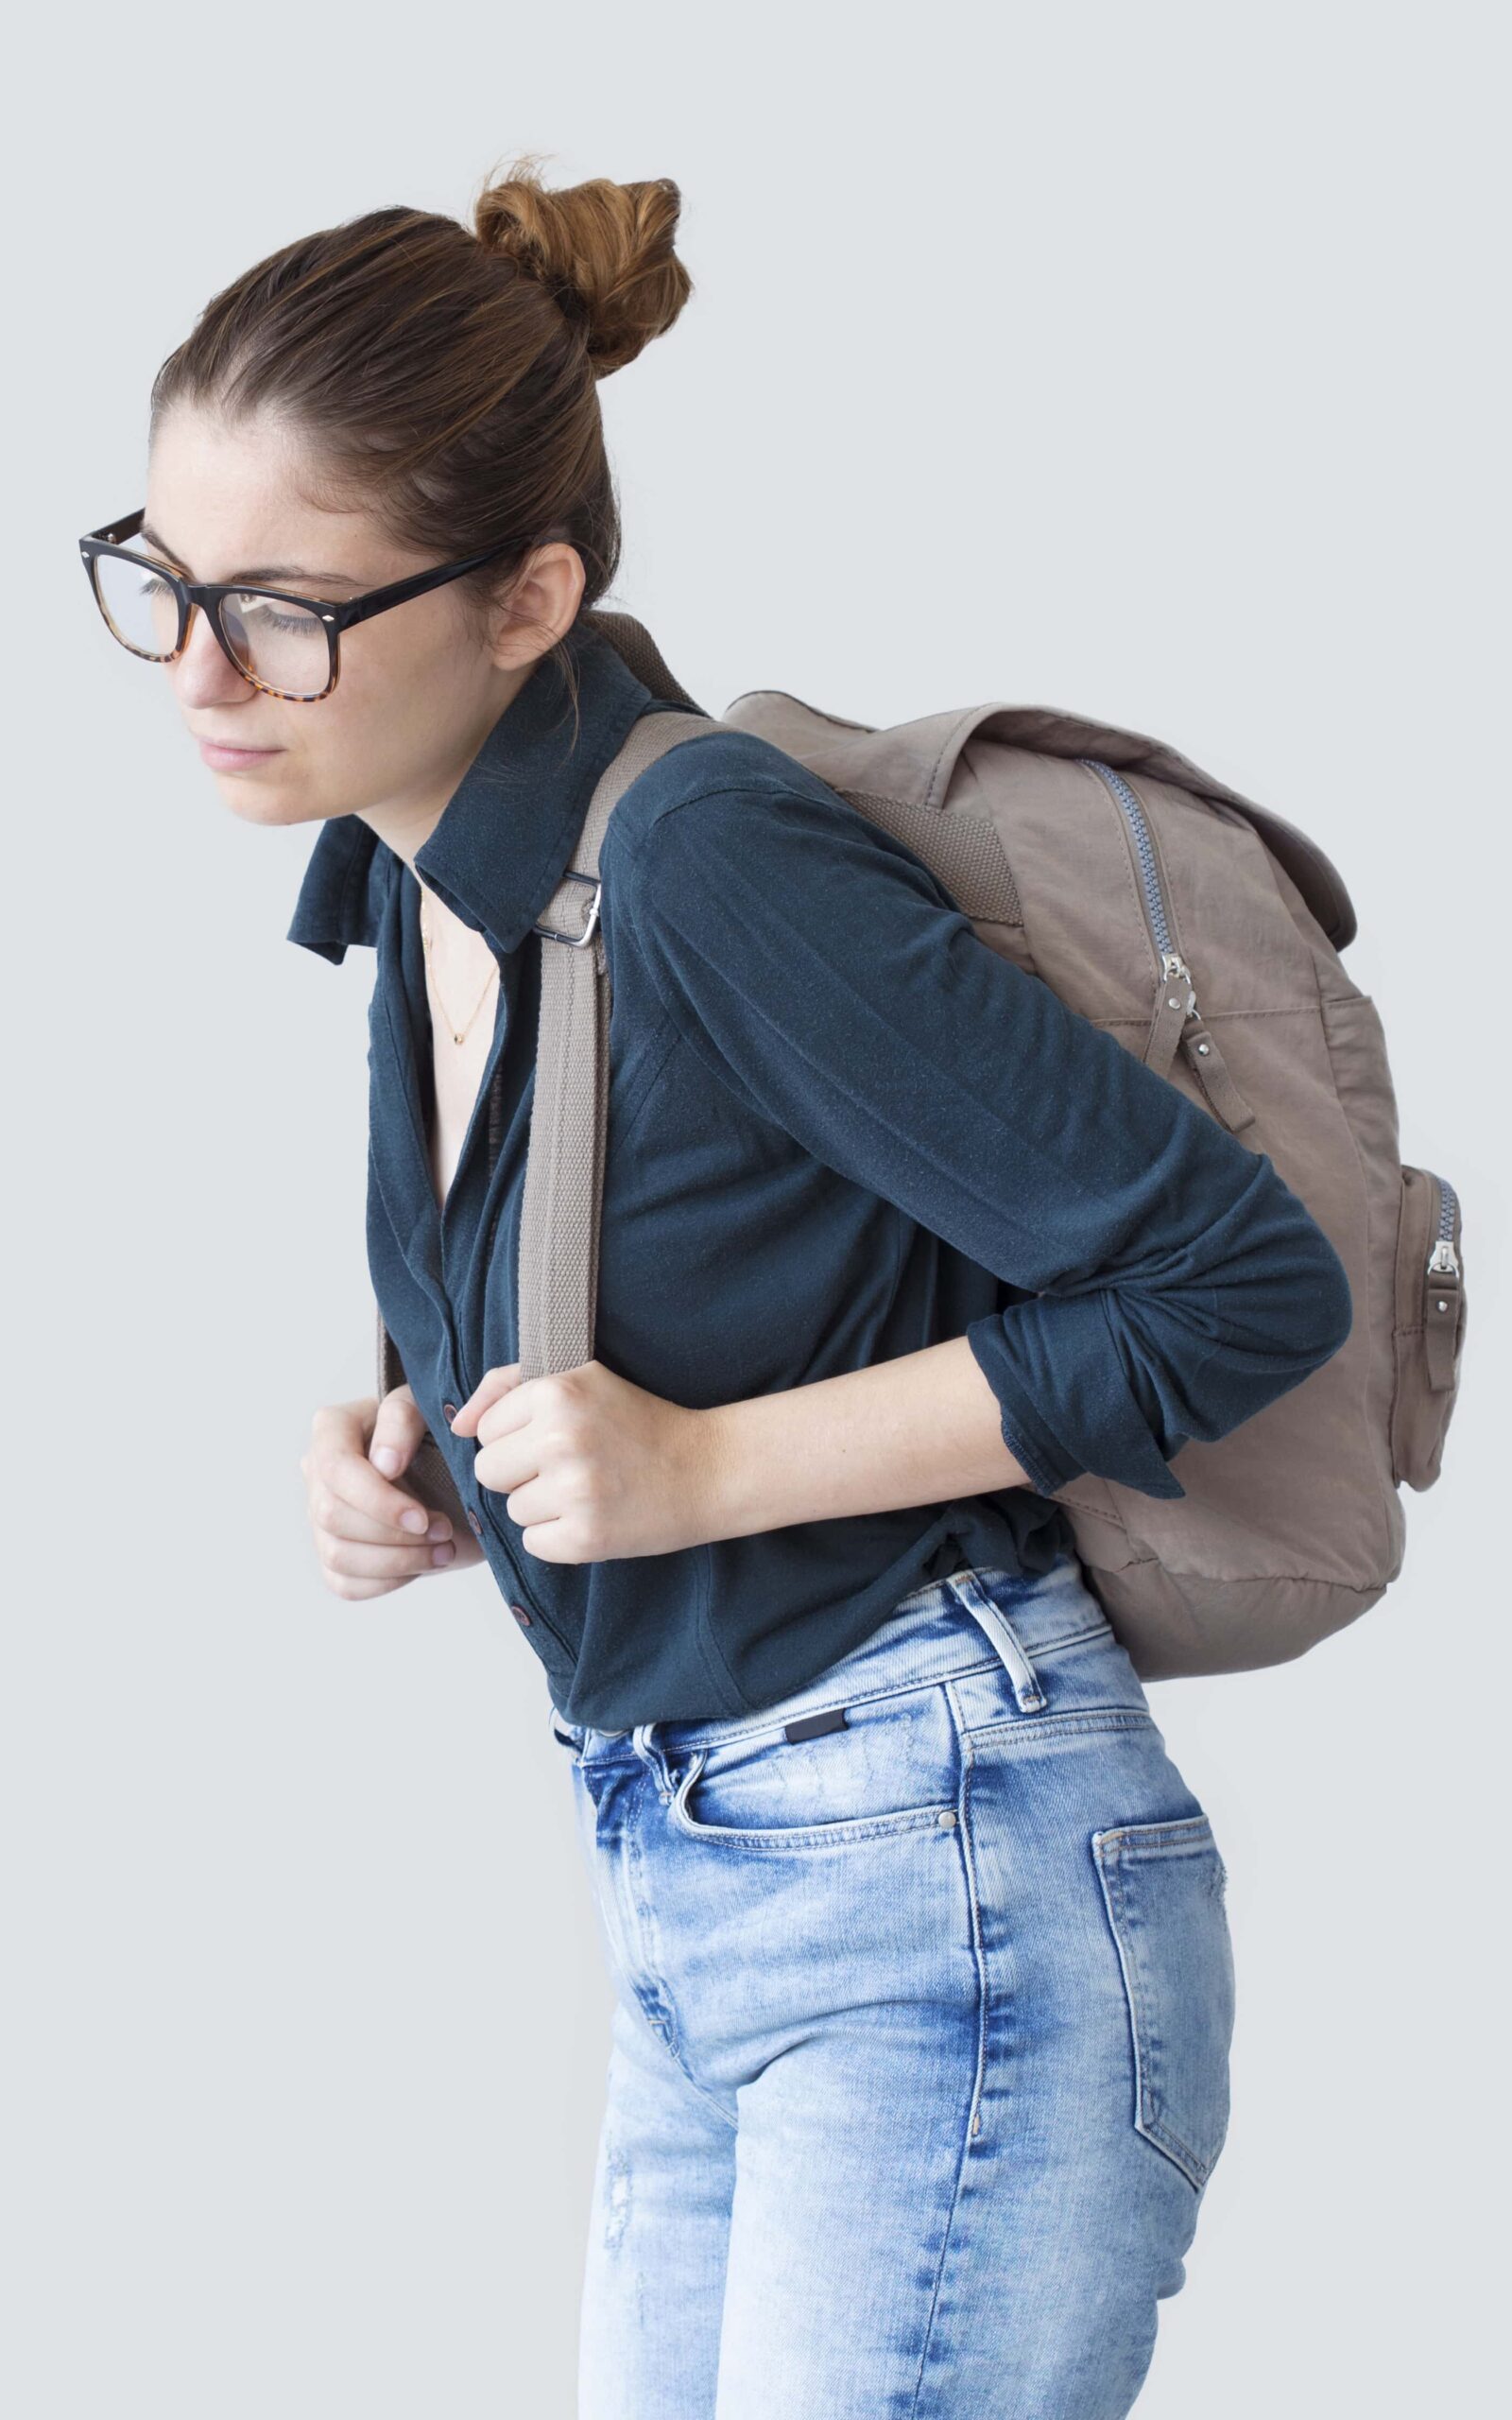 young woman struggling with large backpack